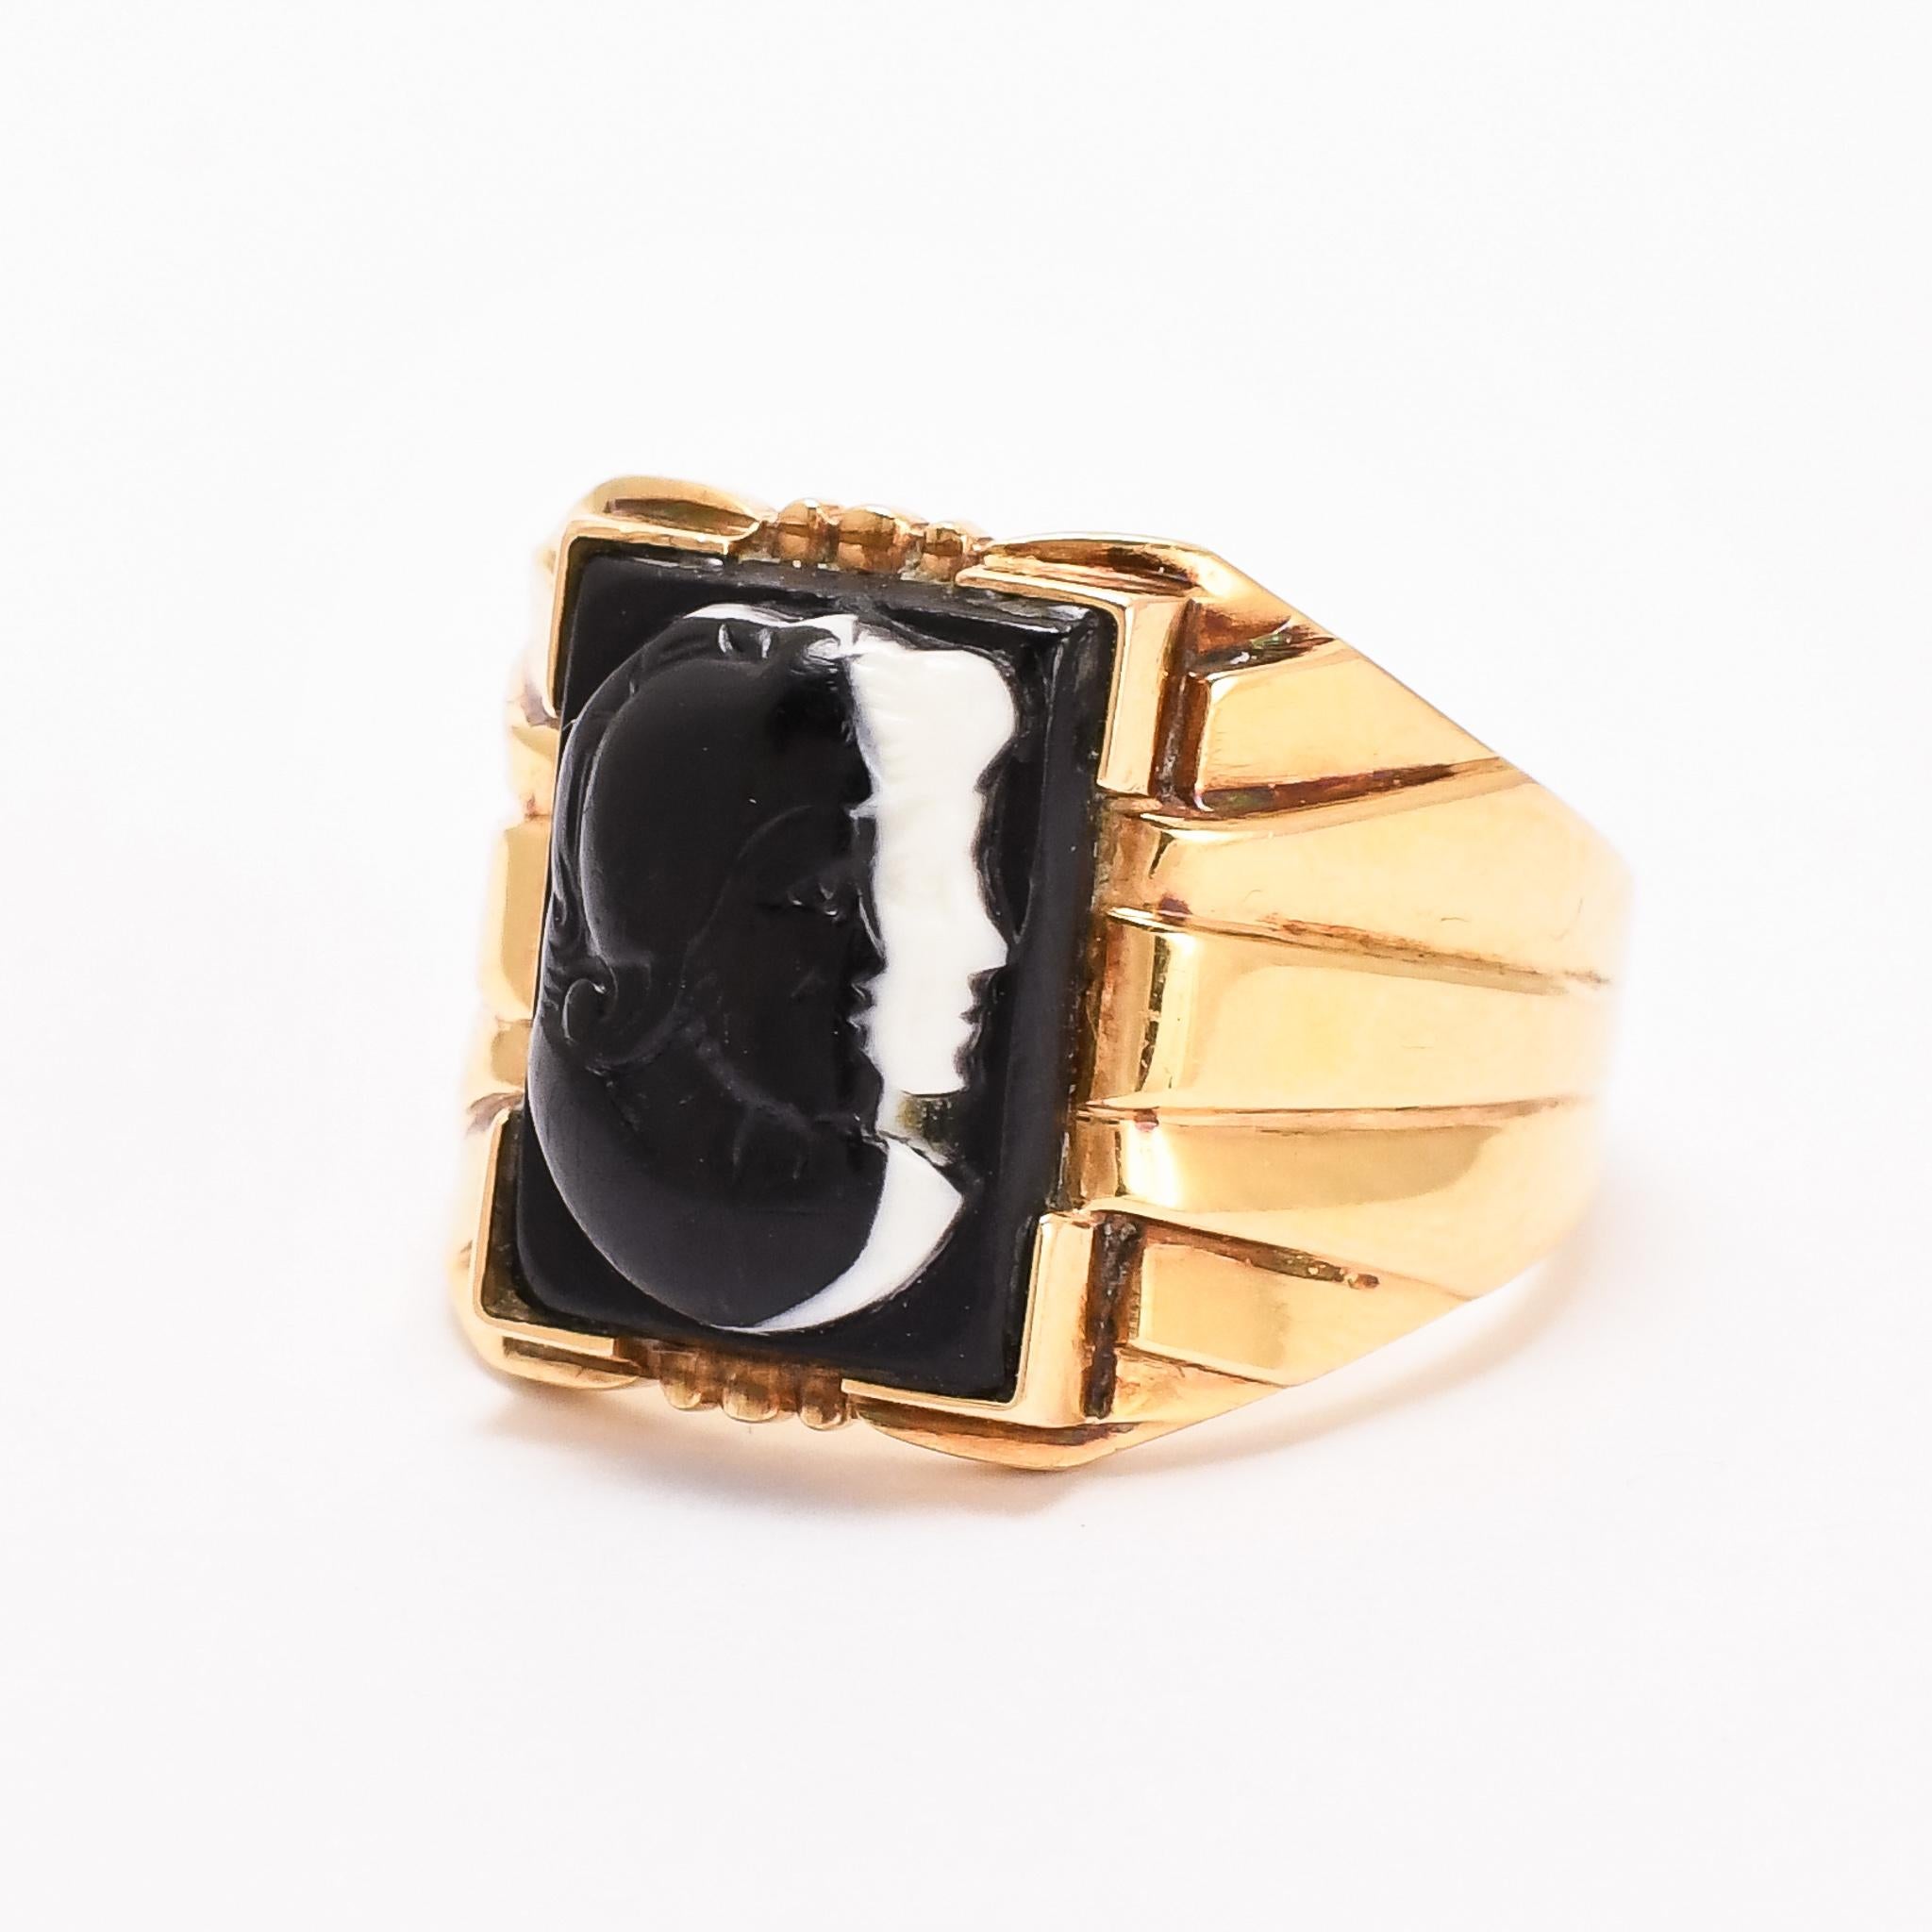 Love & War. A substantial antique signet ring set with an onyx cameo depicting Venus and Mars, both in profile facing to the right, the former rendered in white with Mars in black. The union between Mars and Venus was of particular importance to the